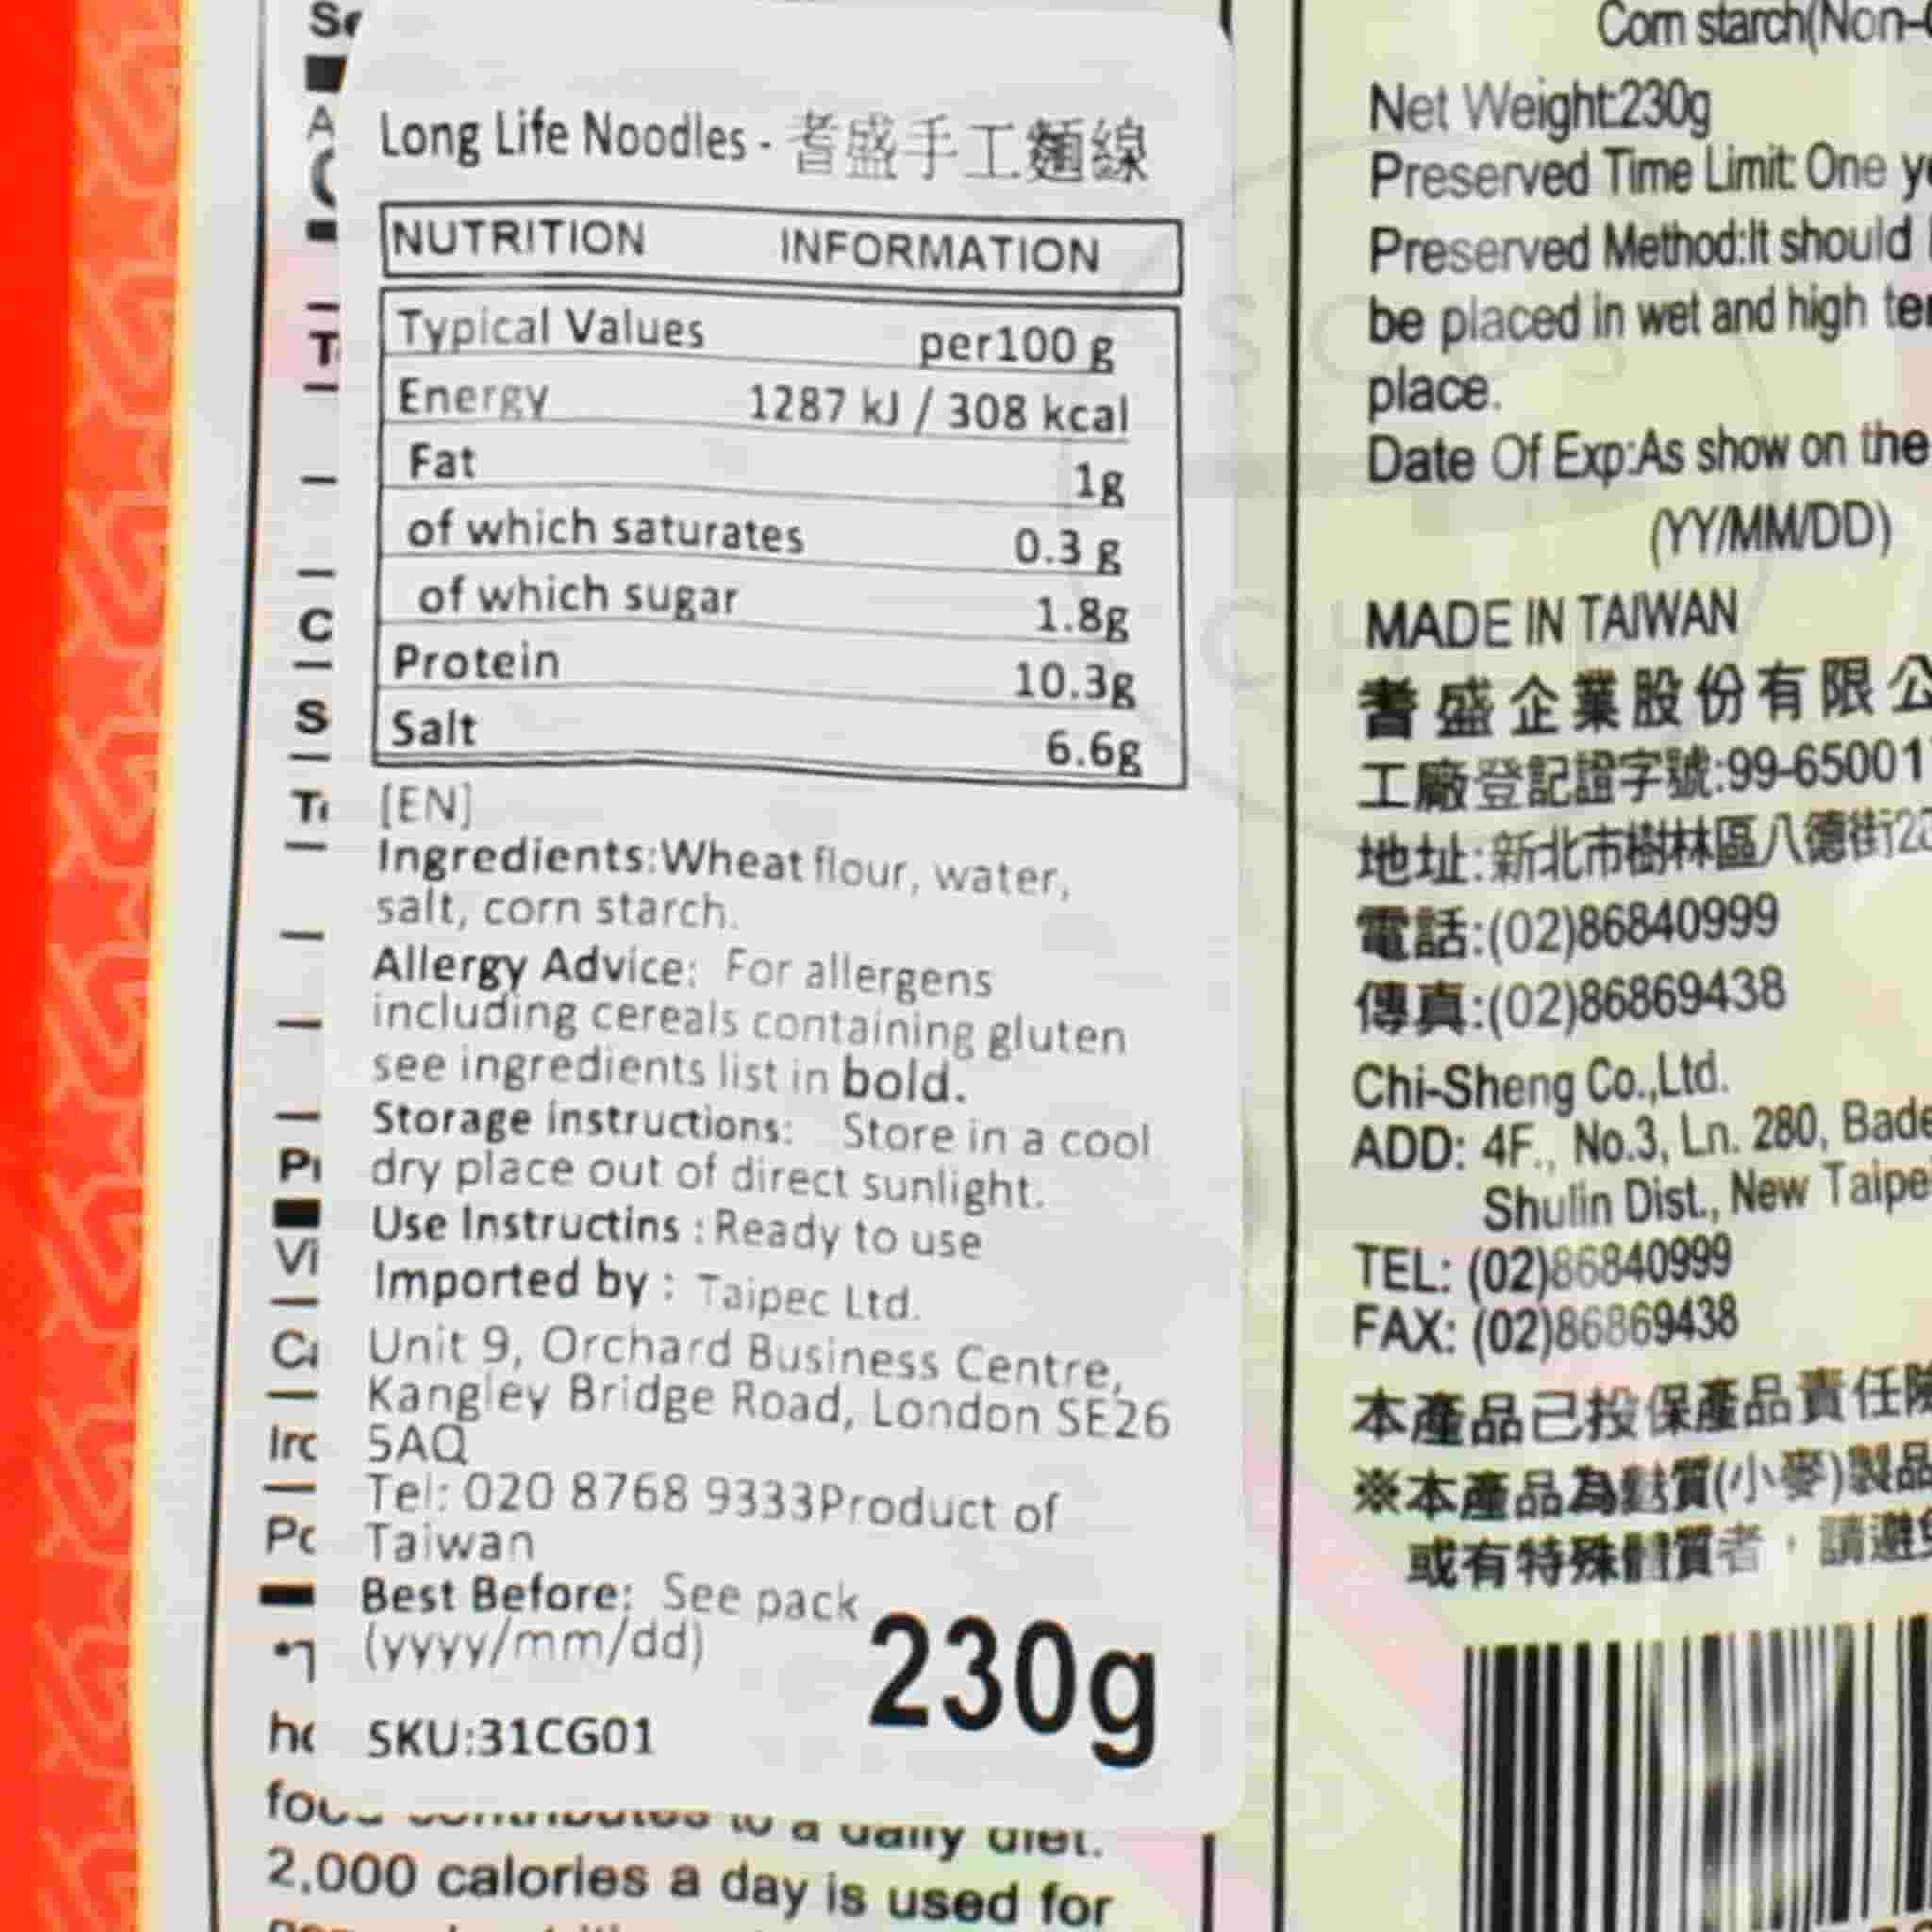 Long Life Noodles 230g ingredients and nutrition